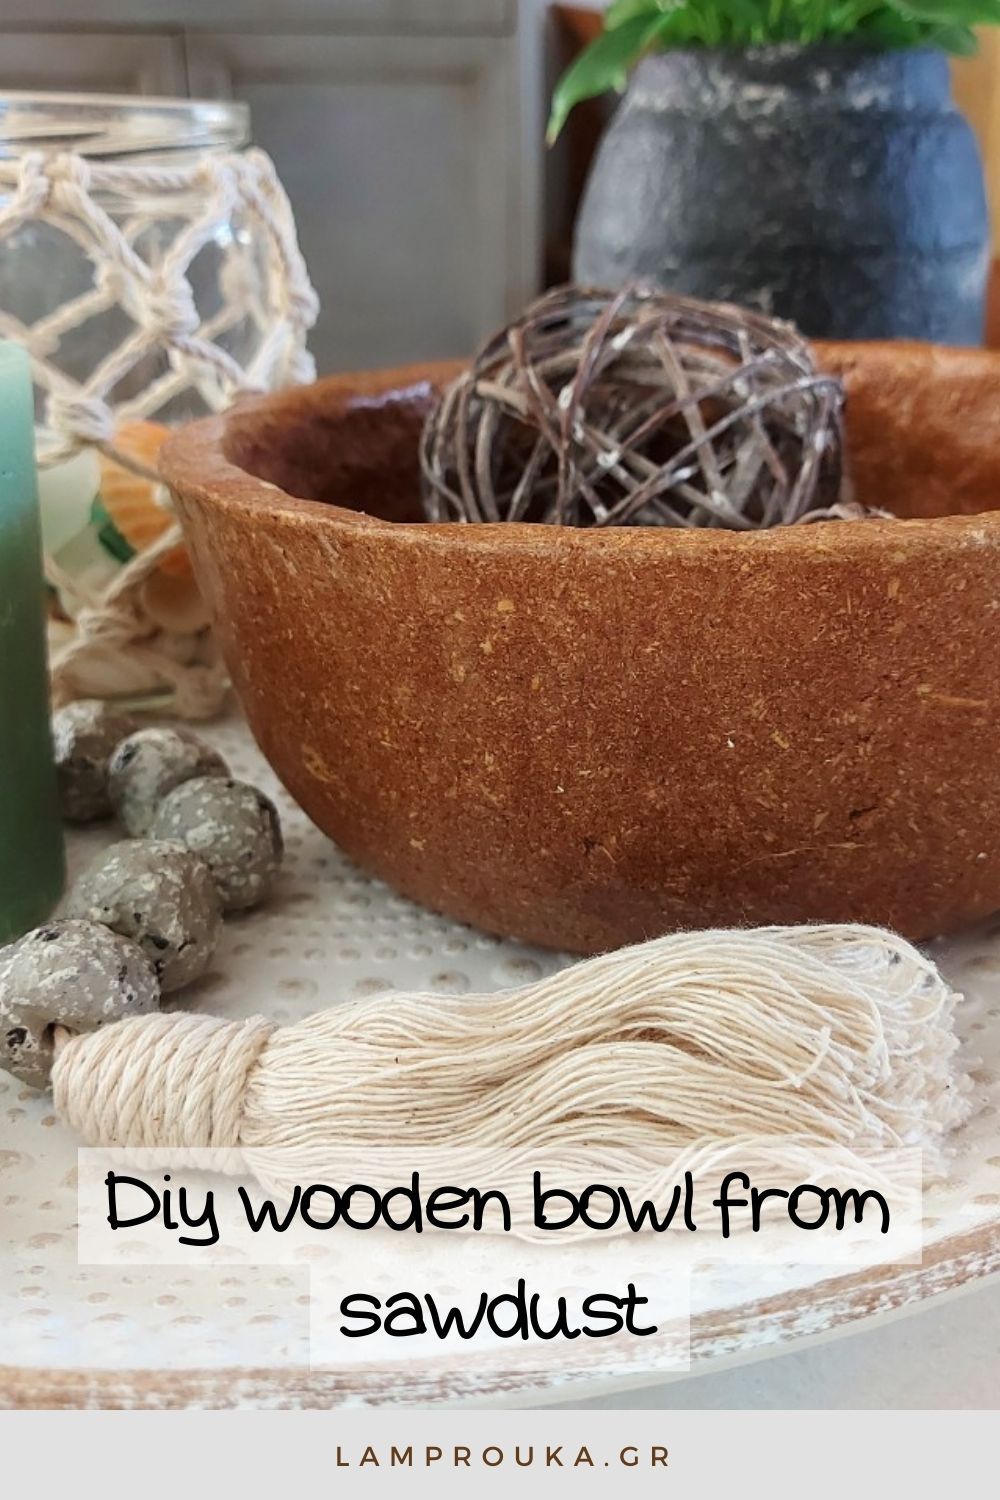 Diy wooden bow from sawdust